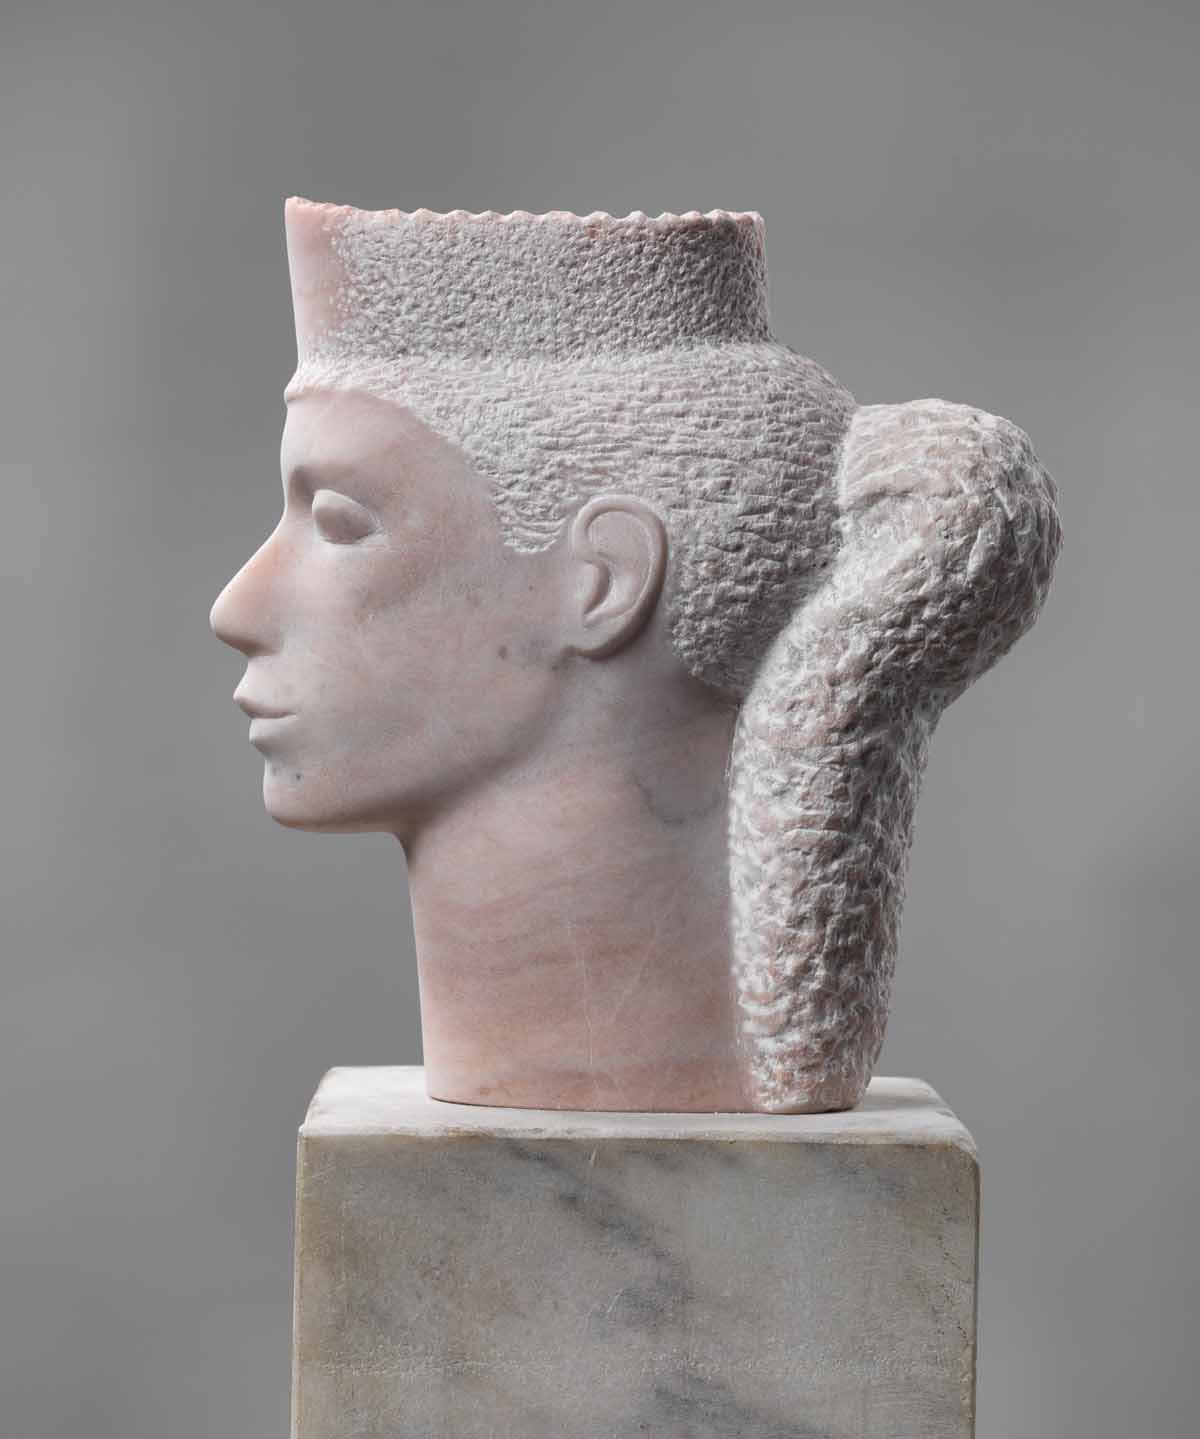   Untitled Head 1,  Pink Marble, 8.5” x 5” x 8" 